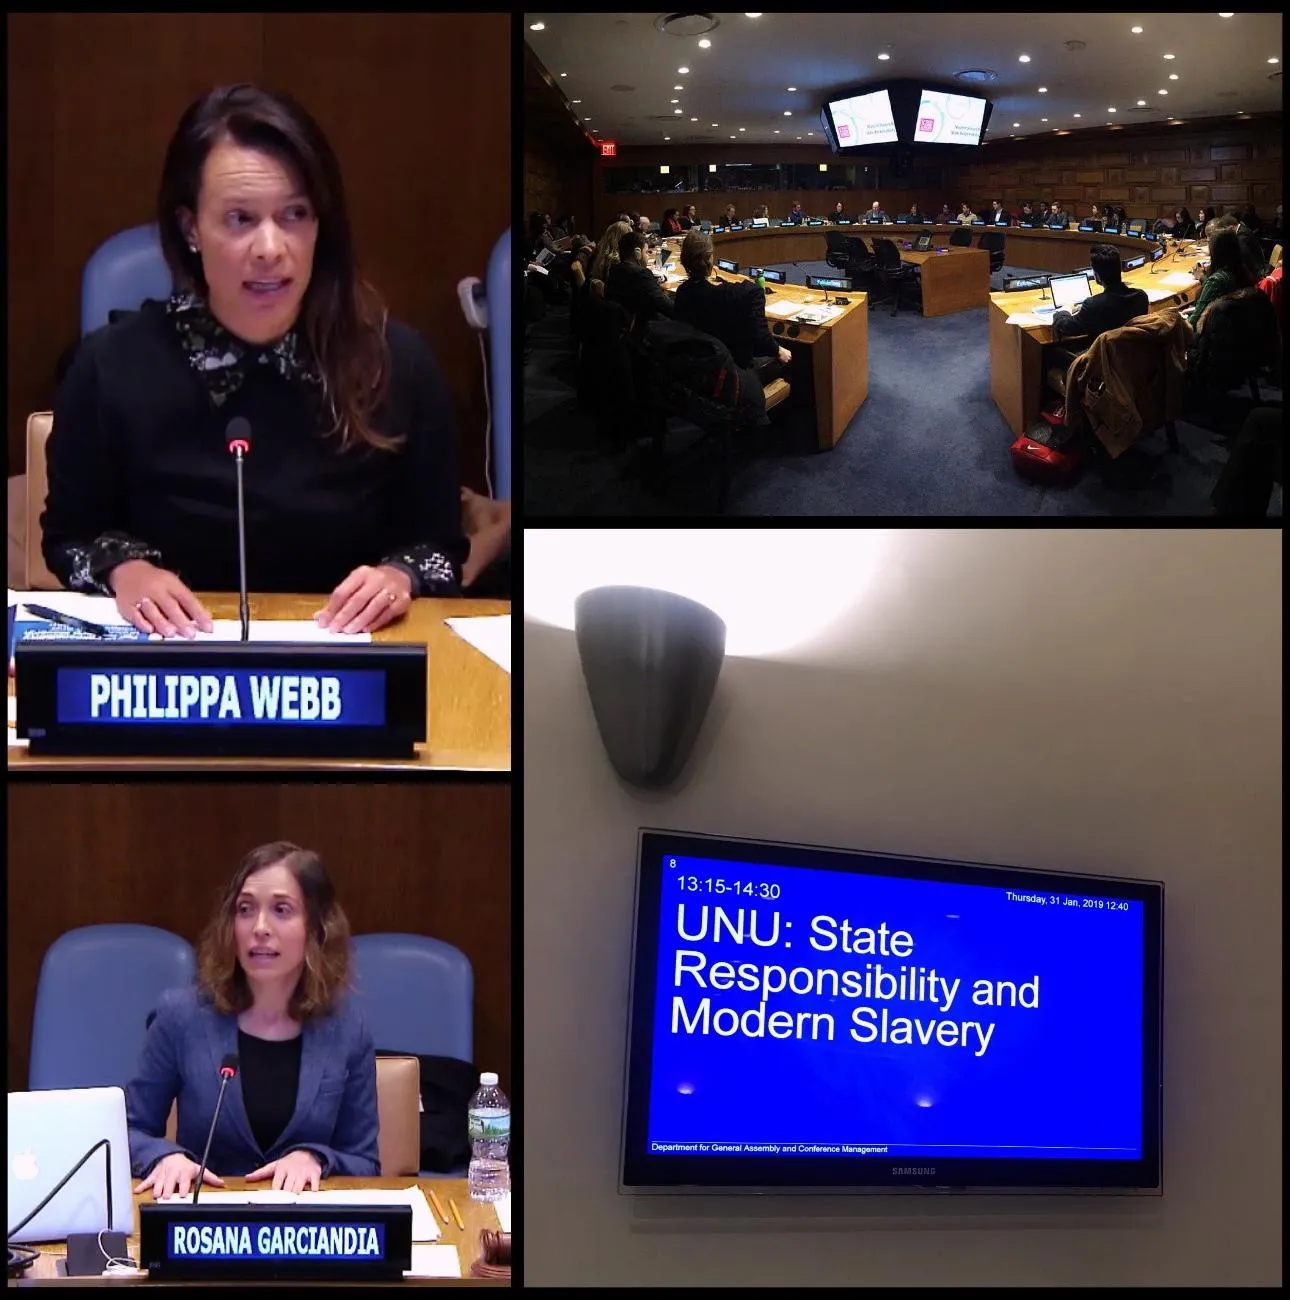 Professor Philippa Webb and Dr Rosana Garciandia speaking at the United Nations earlier this year 